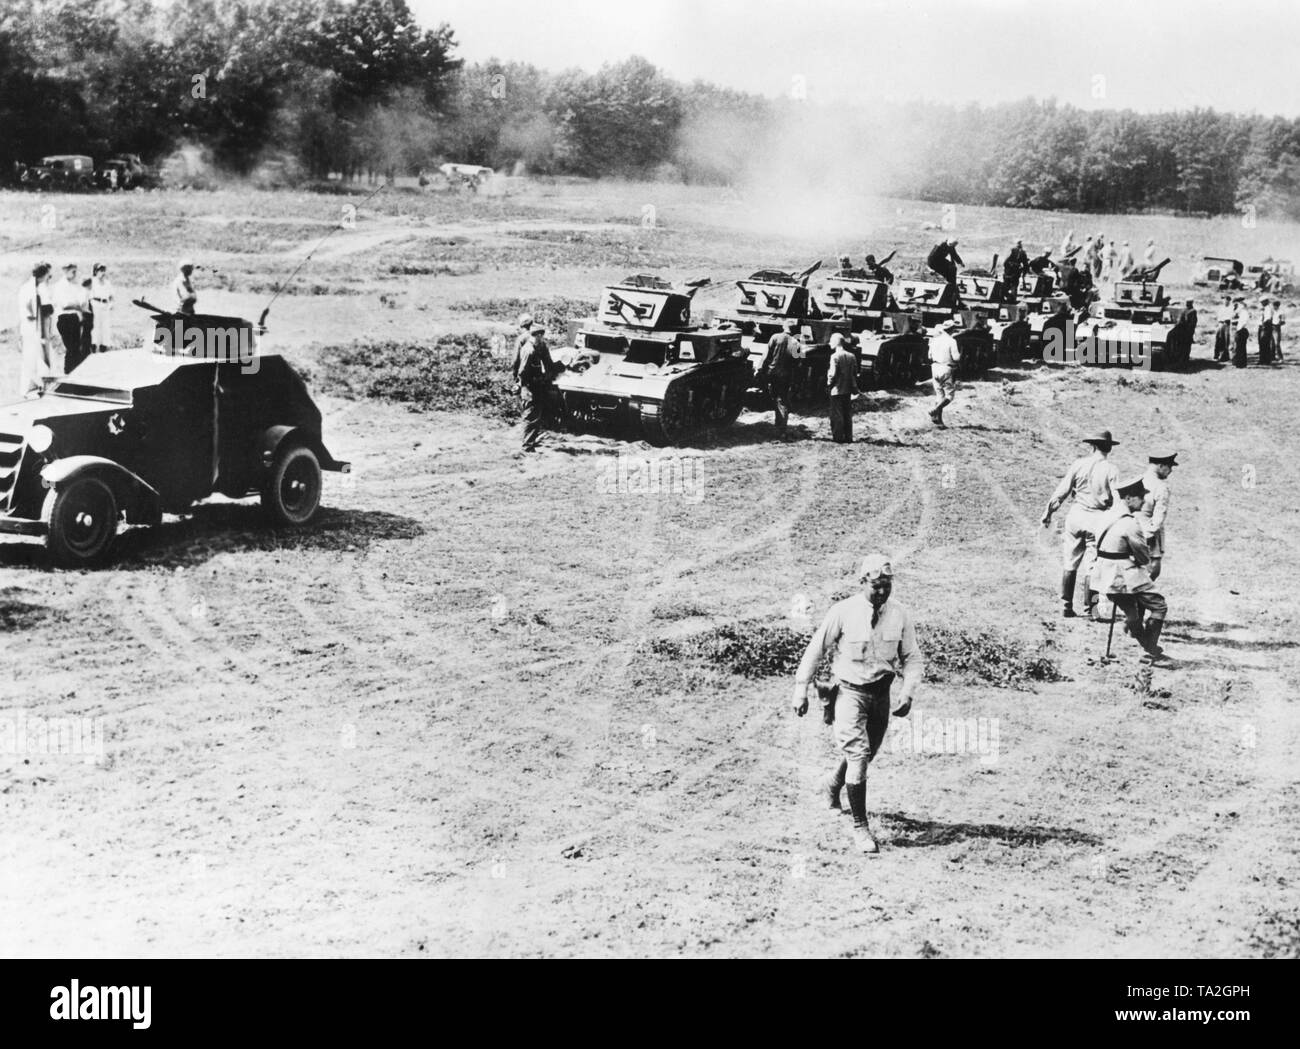 Photo a maneuver of the 424th American Infantry Regiment along with tank departments. What the Americans were trying to do here in the 1930s was to bring the armored car to its position of supremacy in attack operations at the end of the century. The air attack with special bullets ended the battlefield dominance of the armored vehicle (also called 'tank'). It was slow and too easy to hit and destroy. Stock Photo